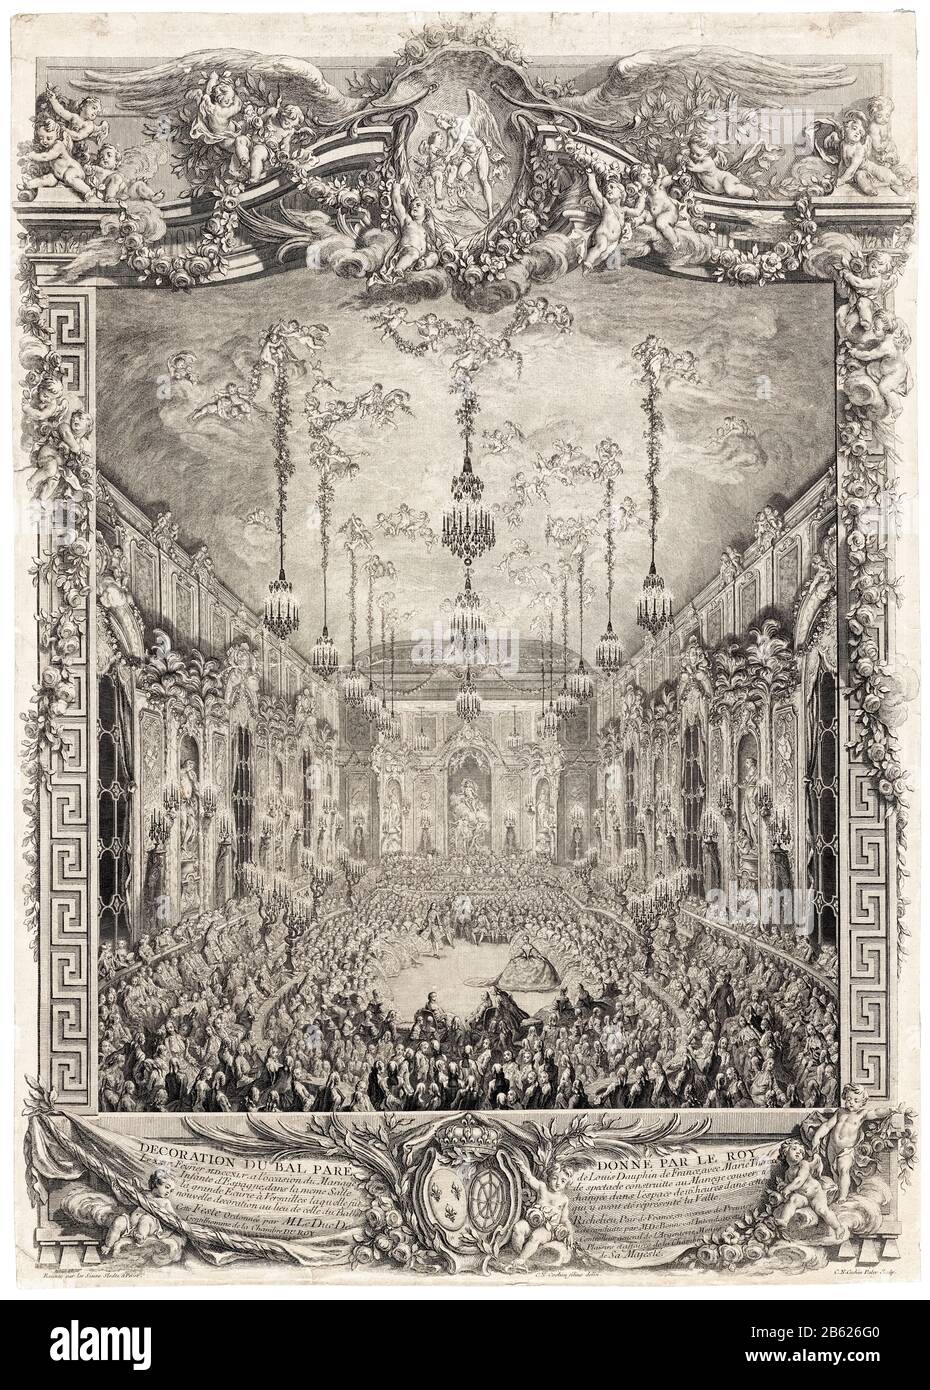 Decoration of the Grand Ball inside the covered riding school, Palace of Versailles, for the wedding of Louis Dauphin Of France to Marie Thérèse of Spain, February 24th 1745, engraving by Michel de Bonneval, Charles-Nicolas Cochin the younger, 1756 Stock Photo